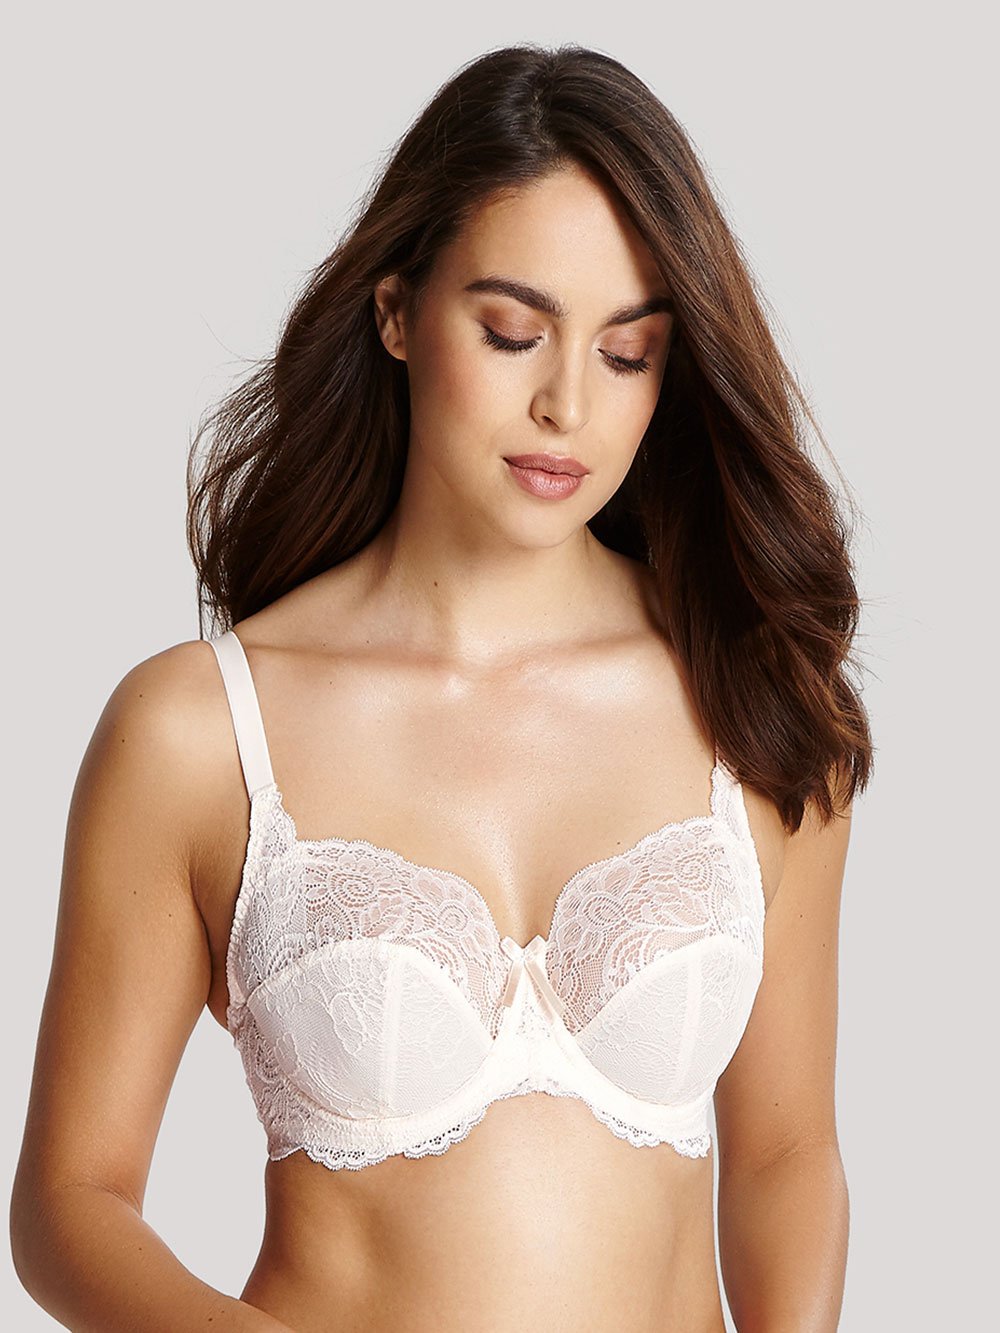 D Cup Bra: Bras for D Cup Boobs and Breast Size - HauteFlair